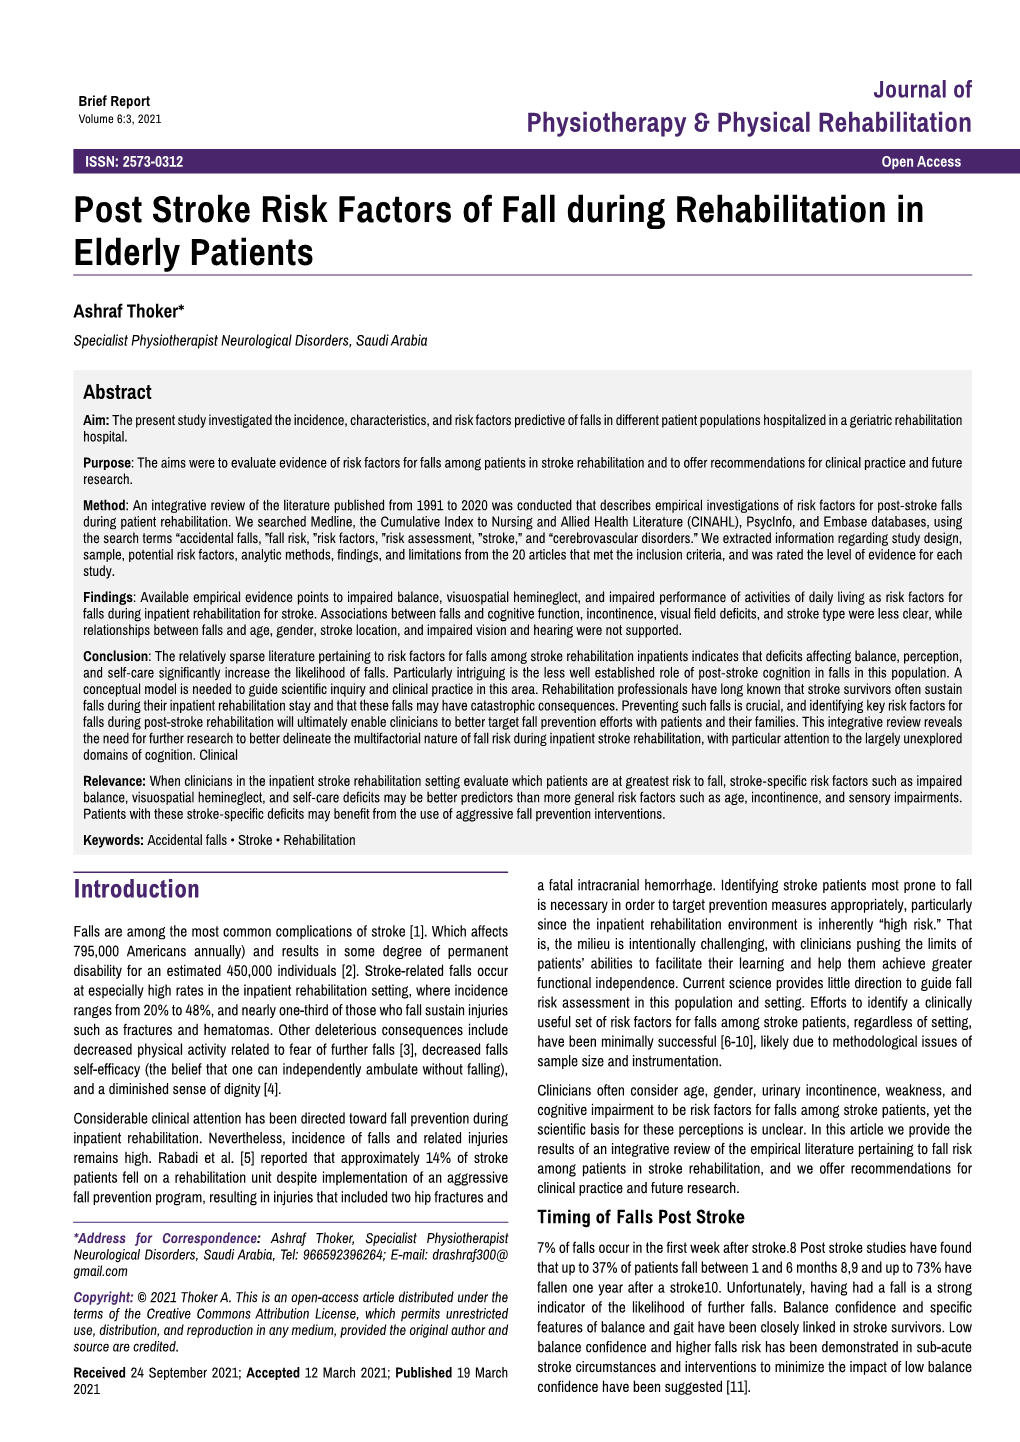 Post Stroke Risk Factors of Fall During Rehabilitation in Elderly Patients